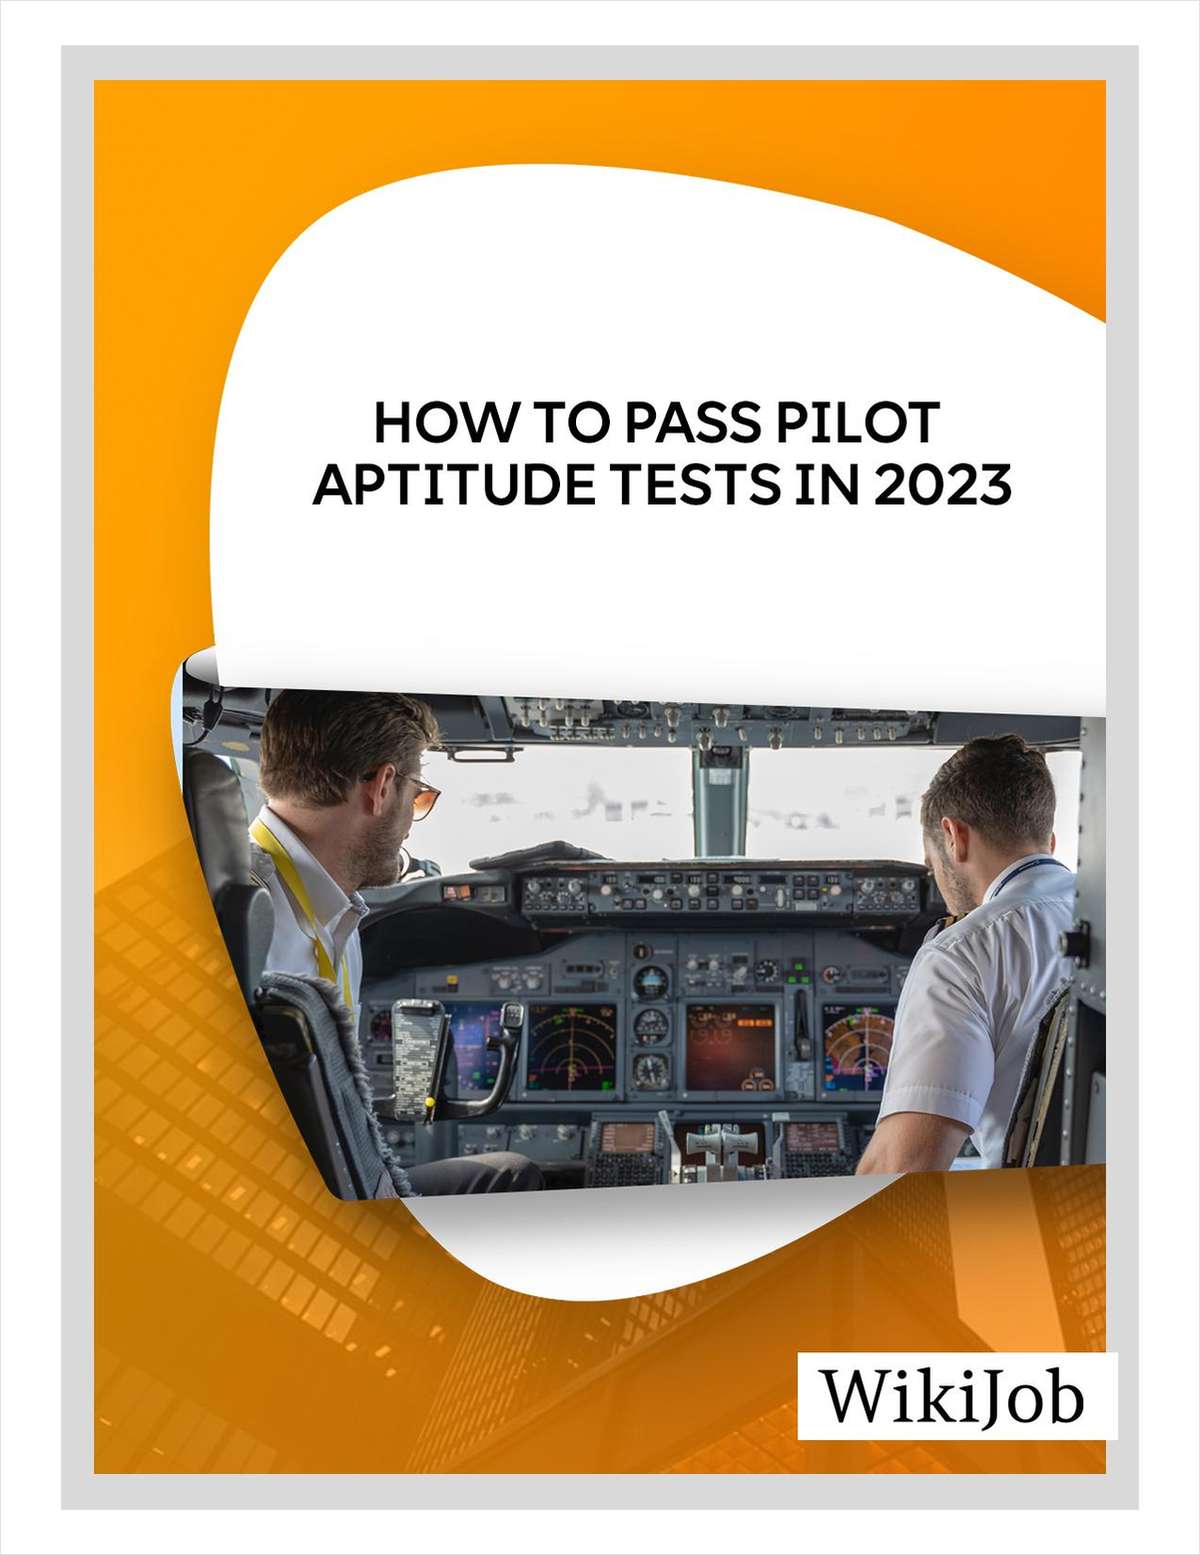 How to Pass Pilot Aptitude Tests in 2023